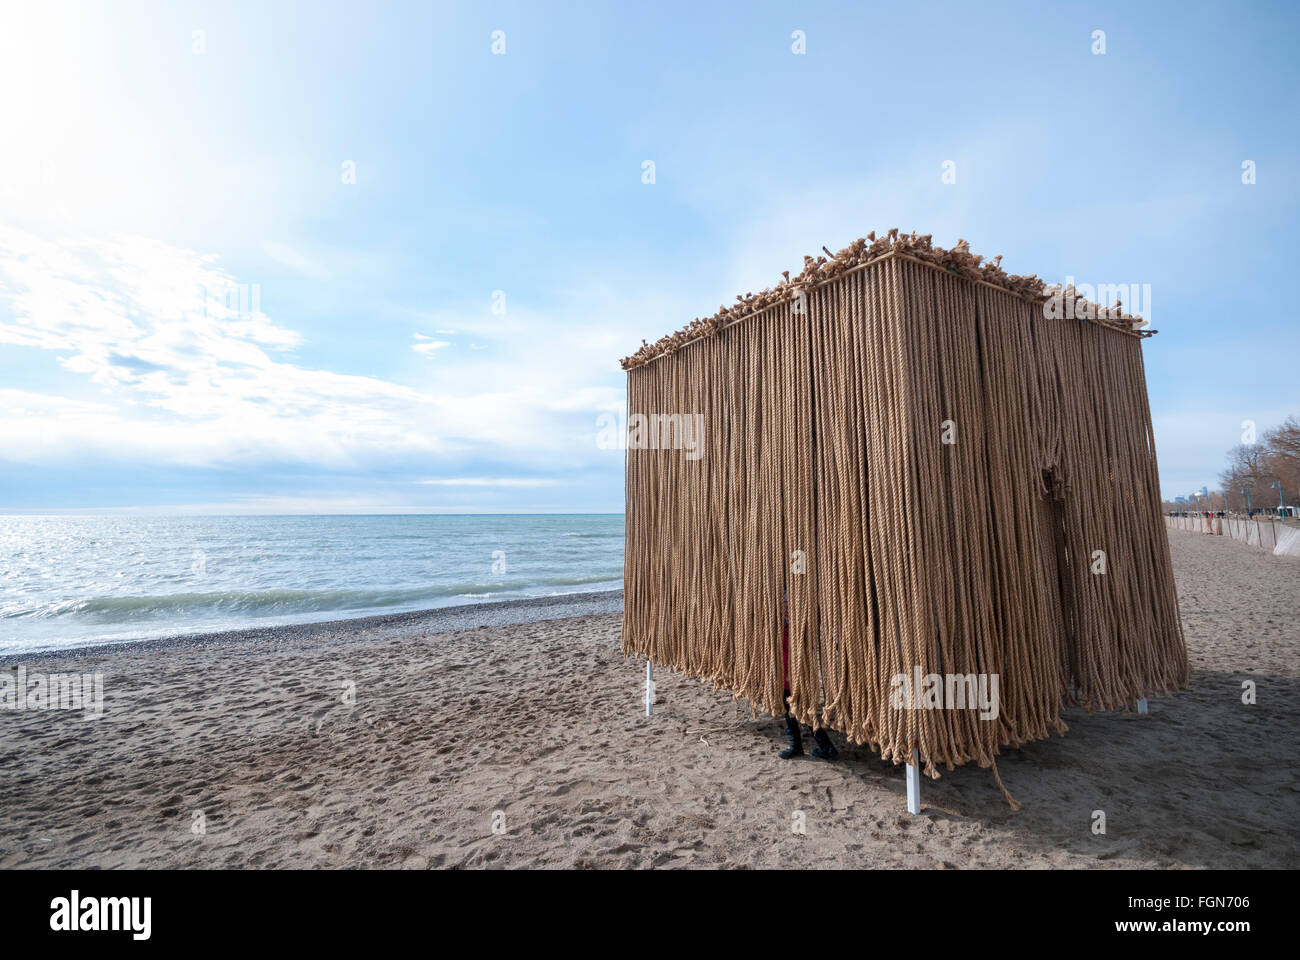 A lifeguard platform is used to create a sculpture entitled "Floating ropes" for a Toronto Beach winter art competition. Stock Photo